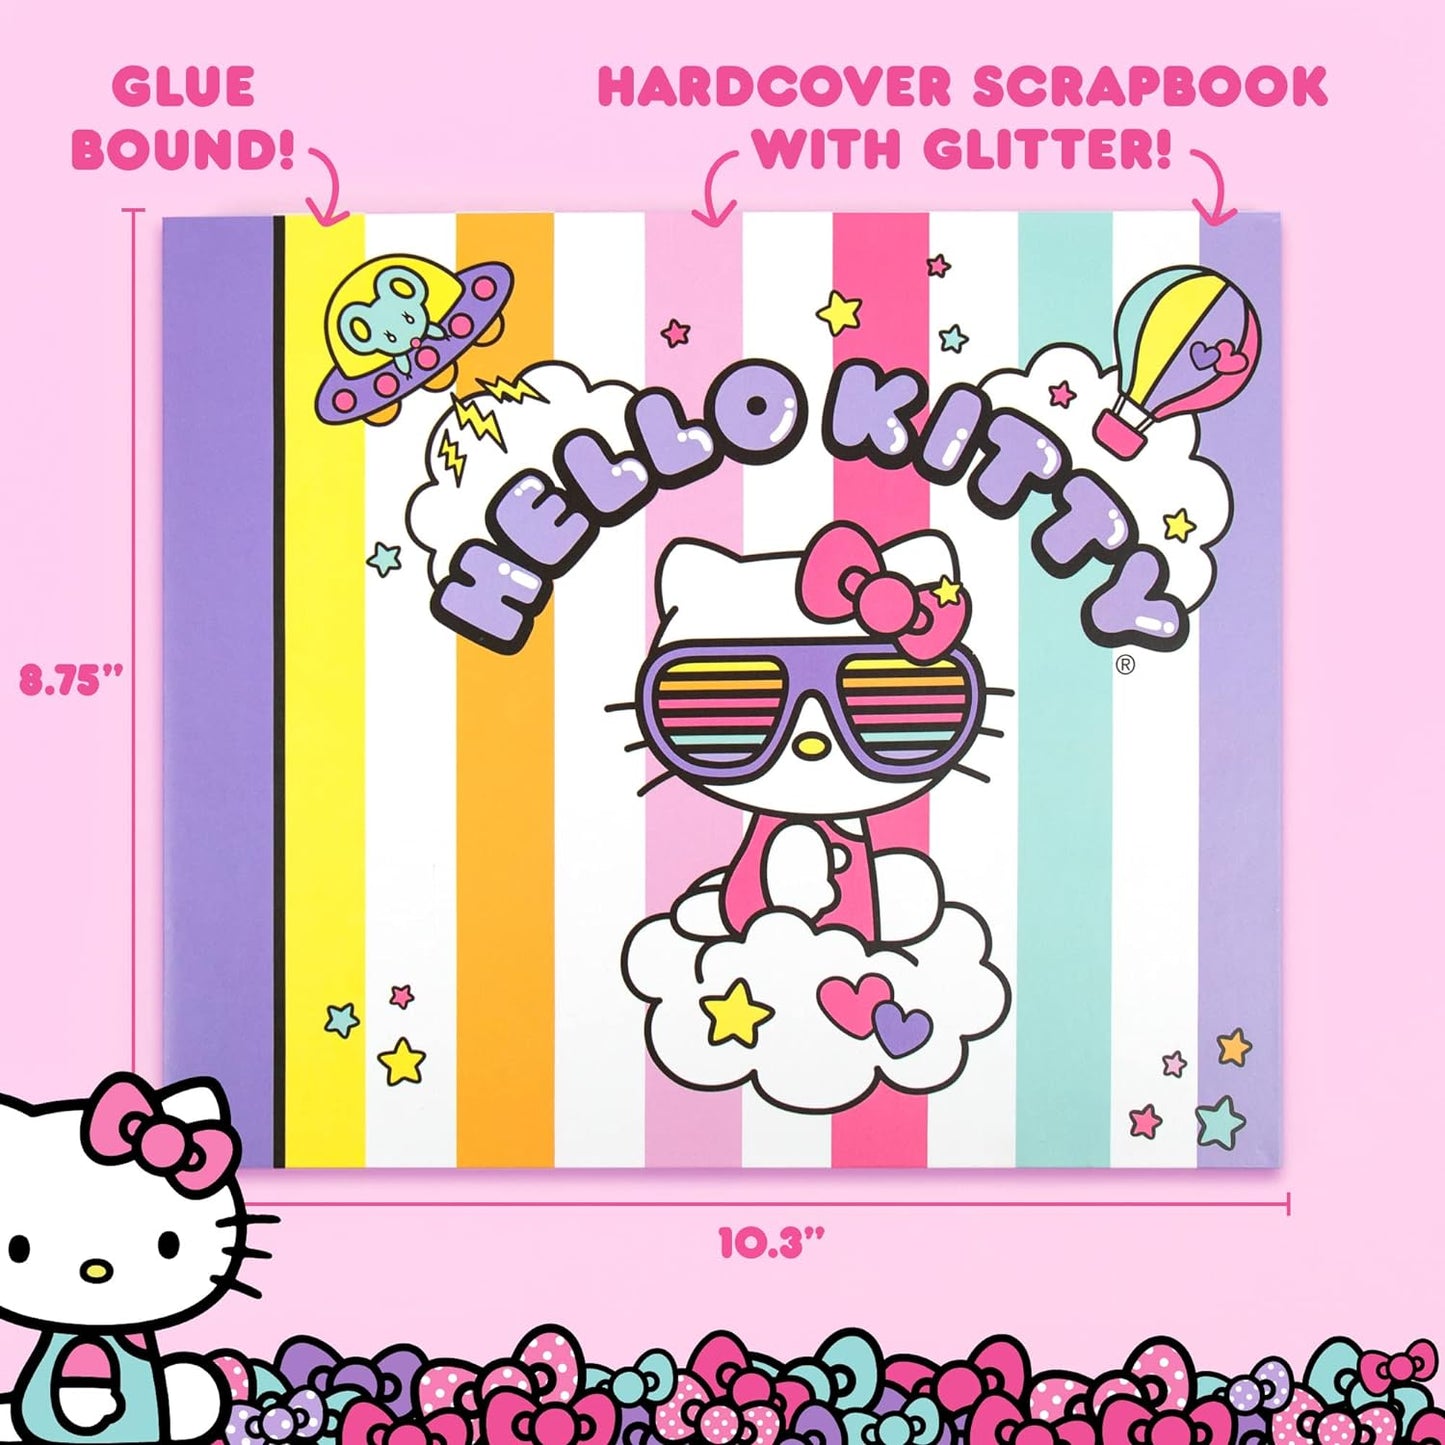 Hello Kitty All-in-One DIY, Design Your Own Scrapbook with Over 250 Essentials, Great Hello Kitty Toys for Weekend Activity, Photo & Keepsake Album for Kids